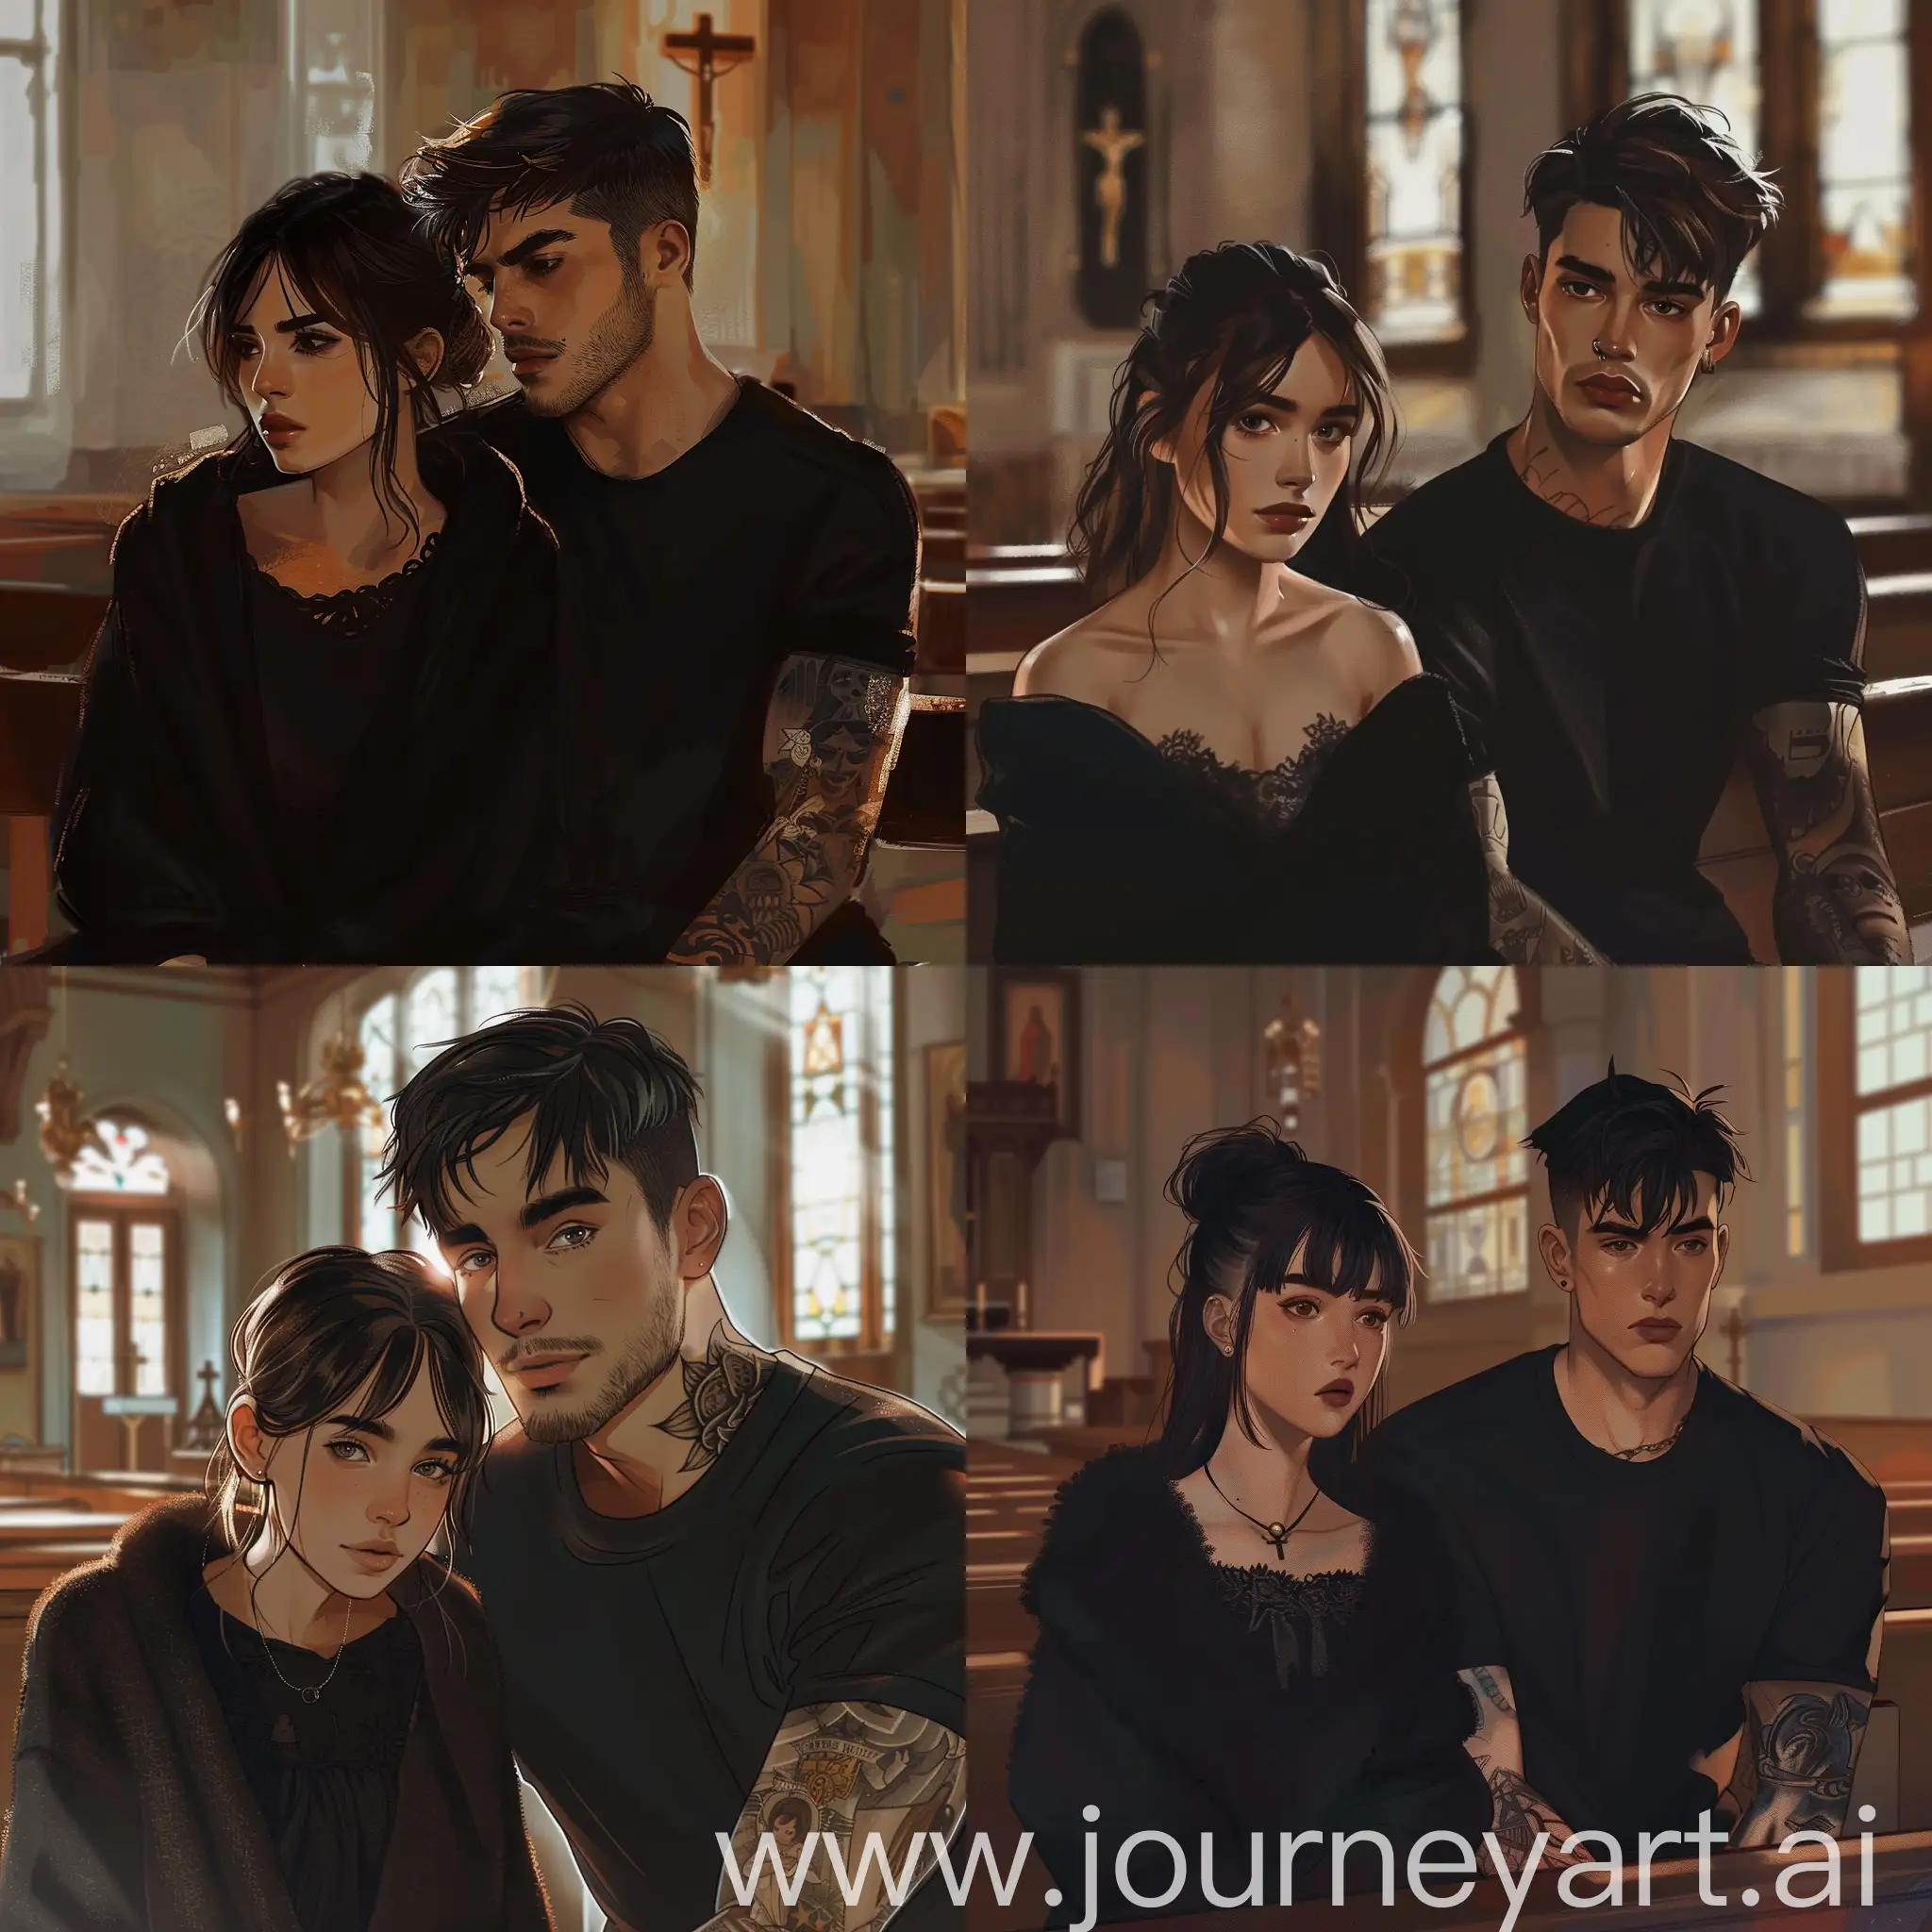 a sweet girl about 18 years old, she has a black warm dress and a guy about 25 years old, he has dark hair and he has very short hair, he wears a black T-shirt and he has tattoos. They are sitting in the church. in the art style